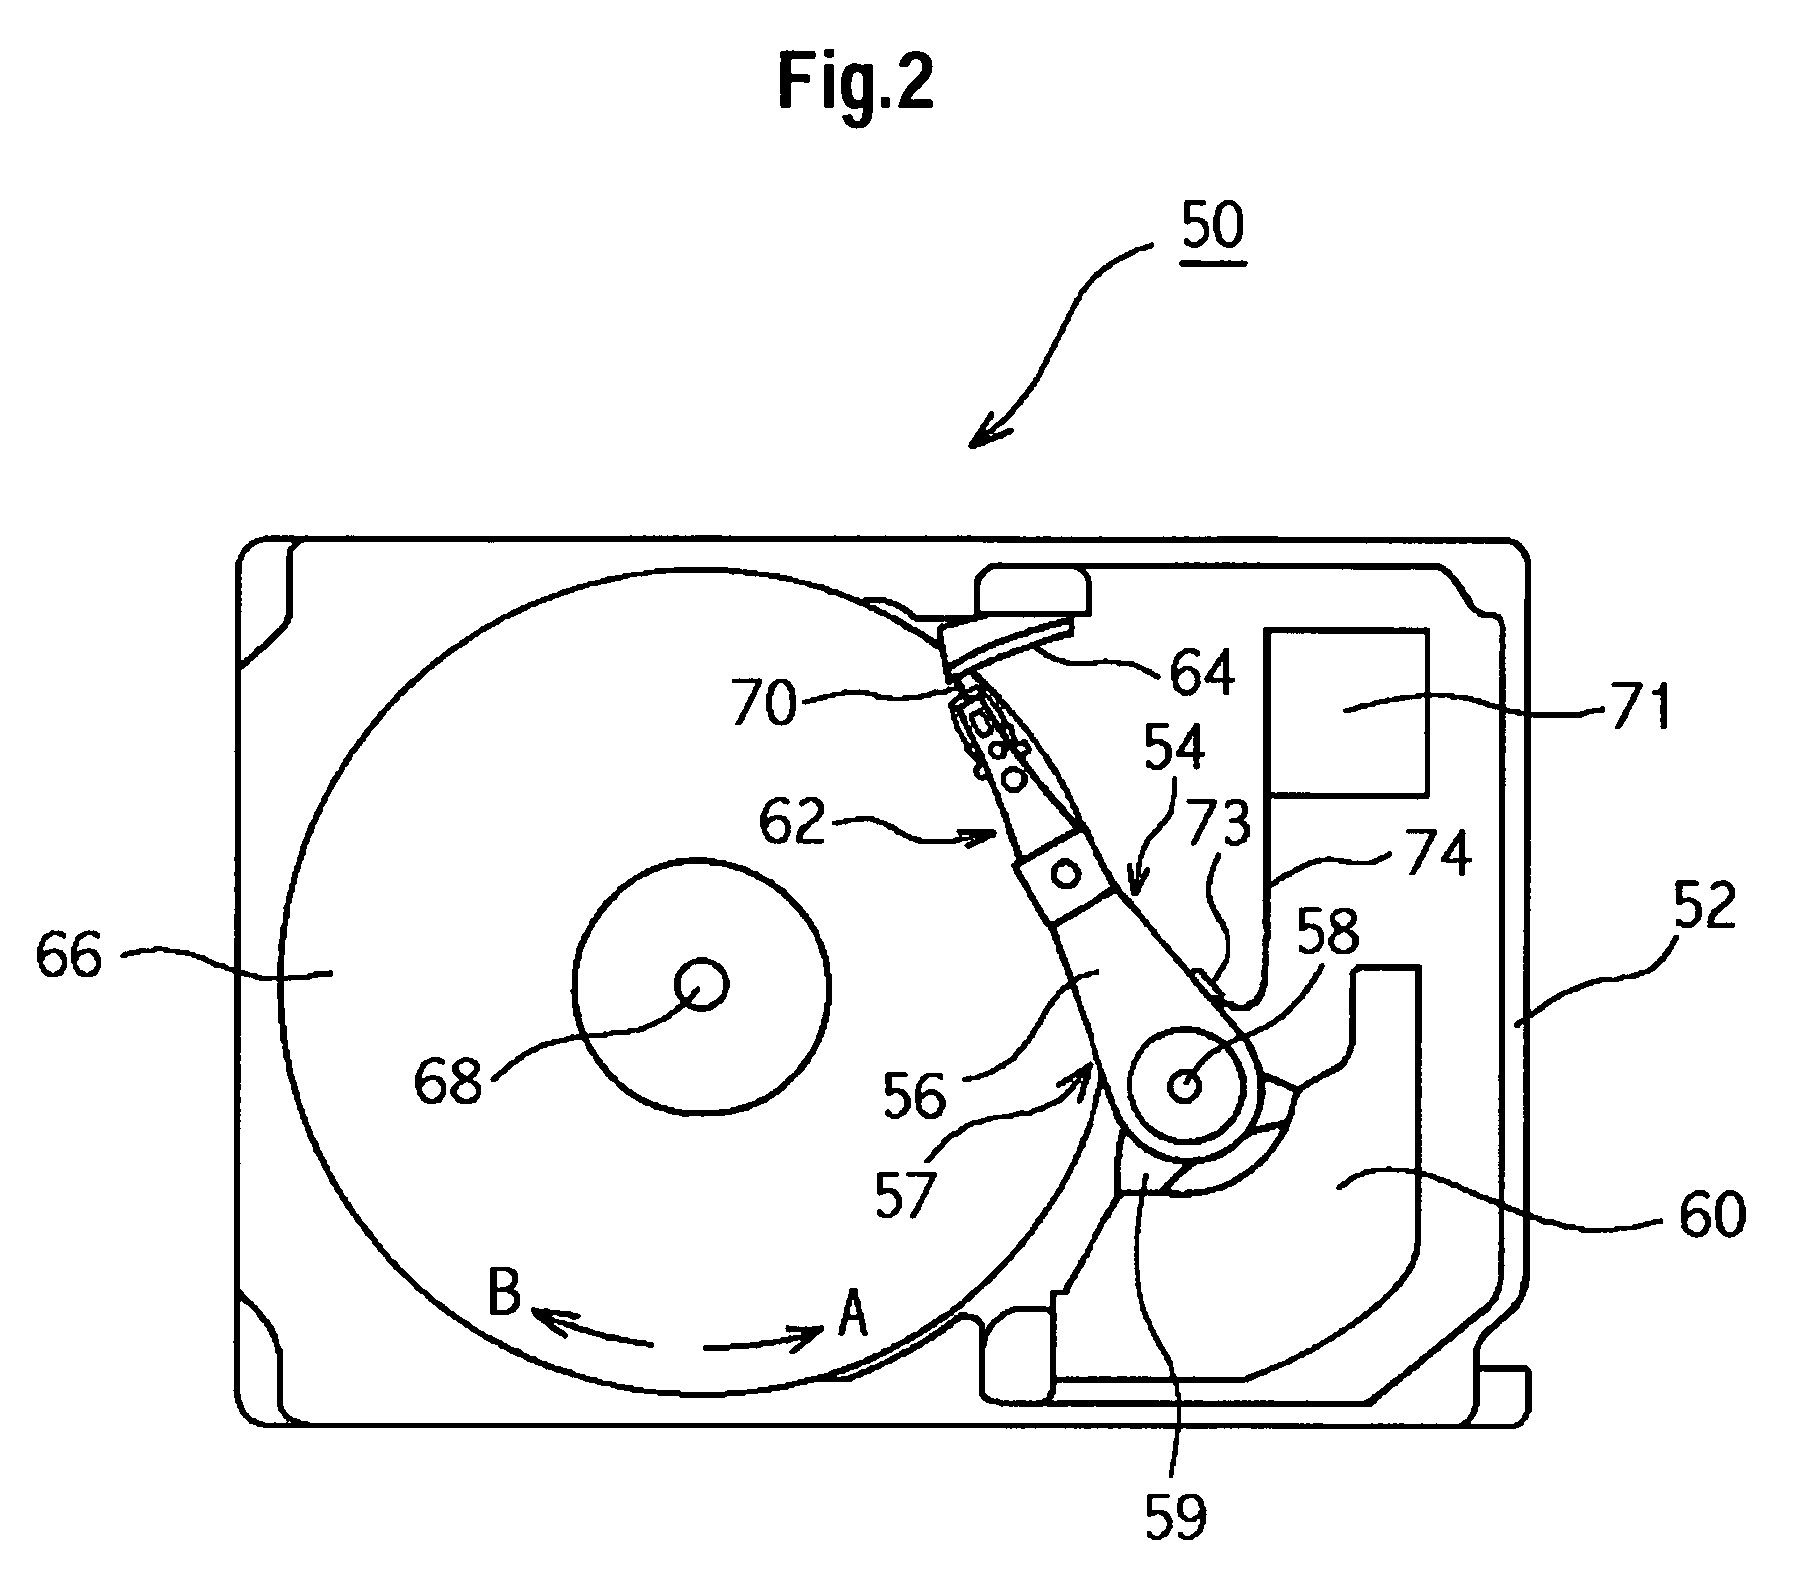 Head/slider supporting structure having lead wire inclined relative to slider pad